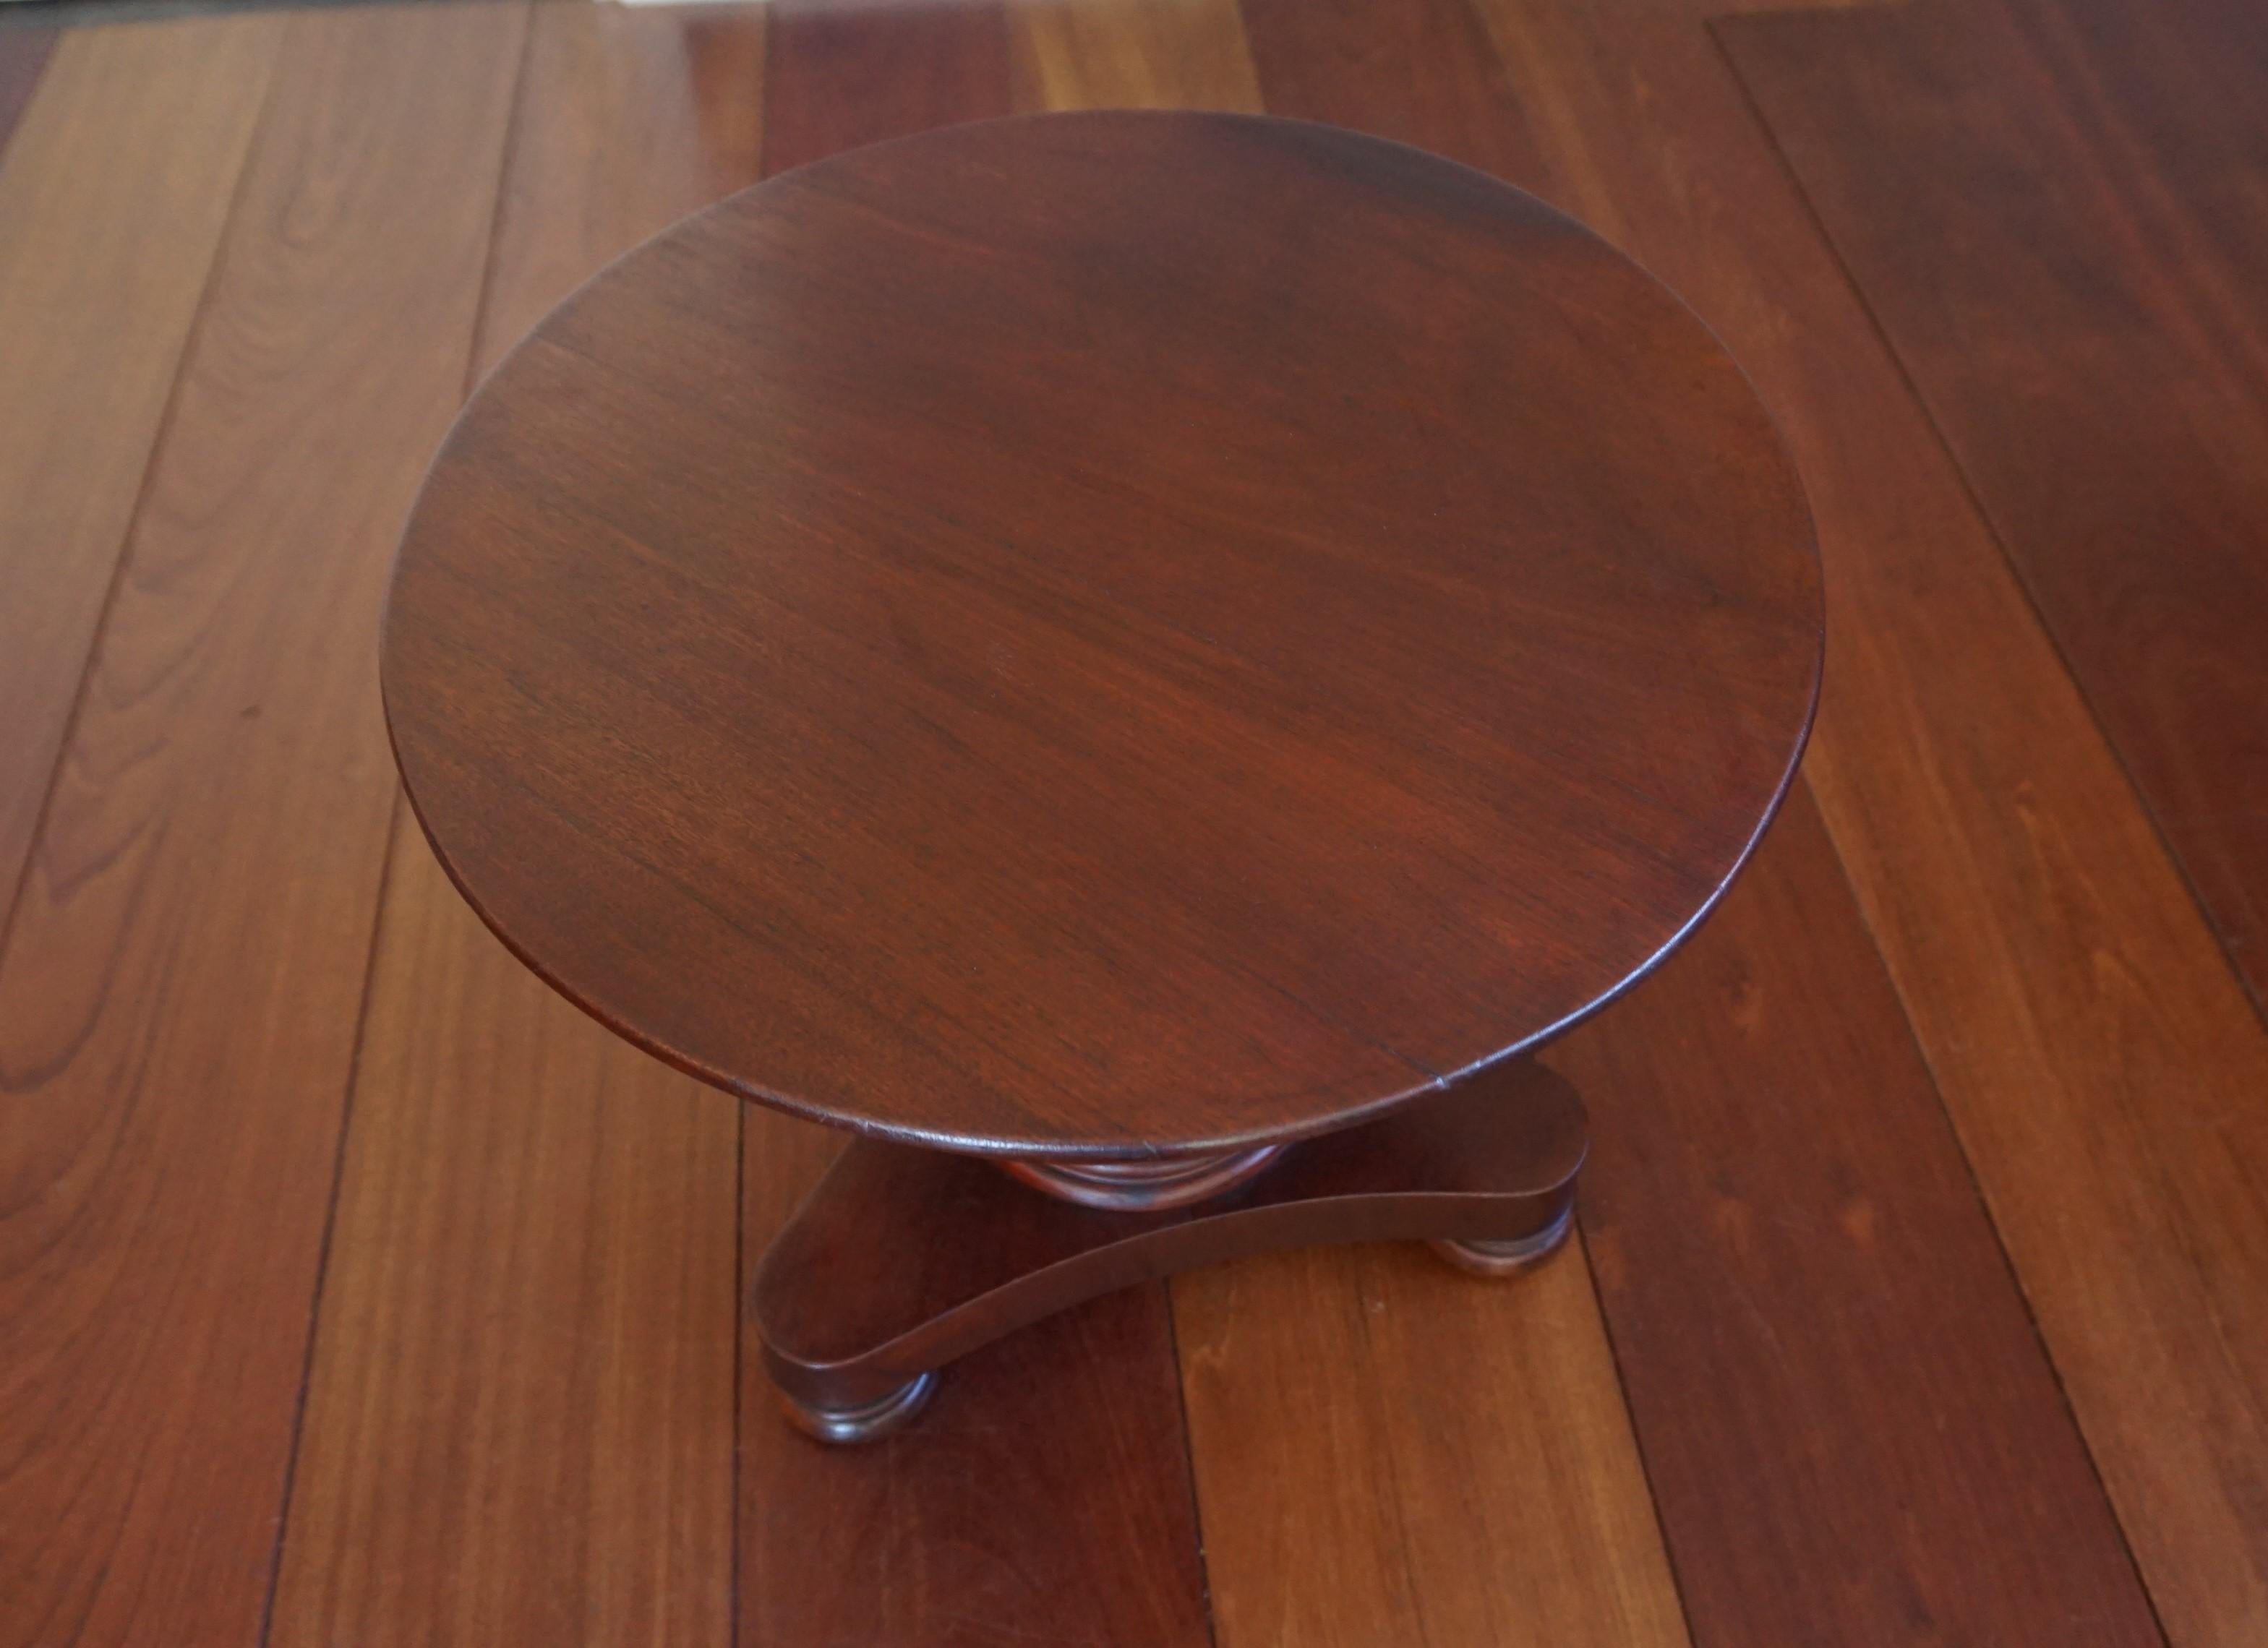 Hand-Crafted Stunning 19th Century Solid Mahogany Round End Table / Wine Table / Plant Stand